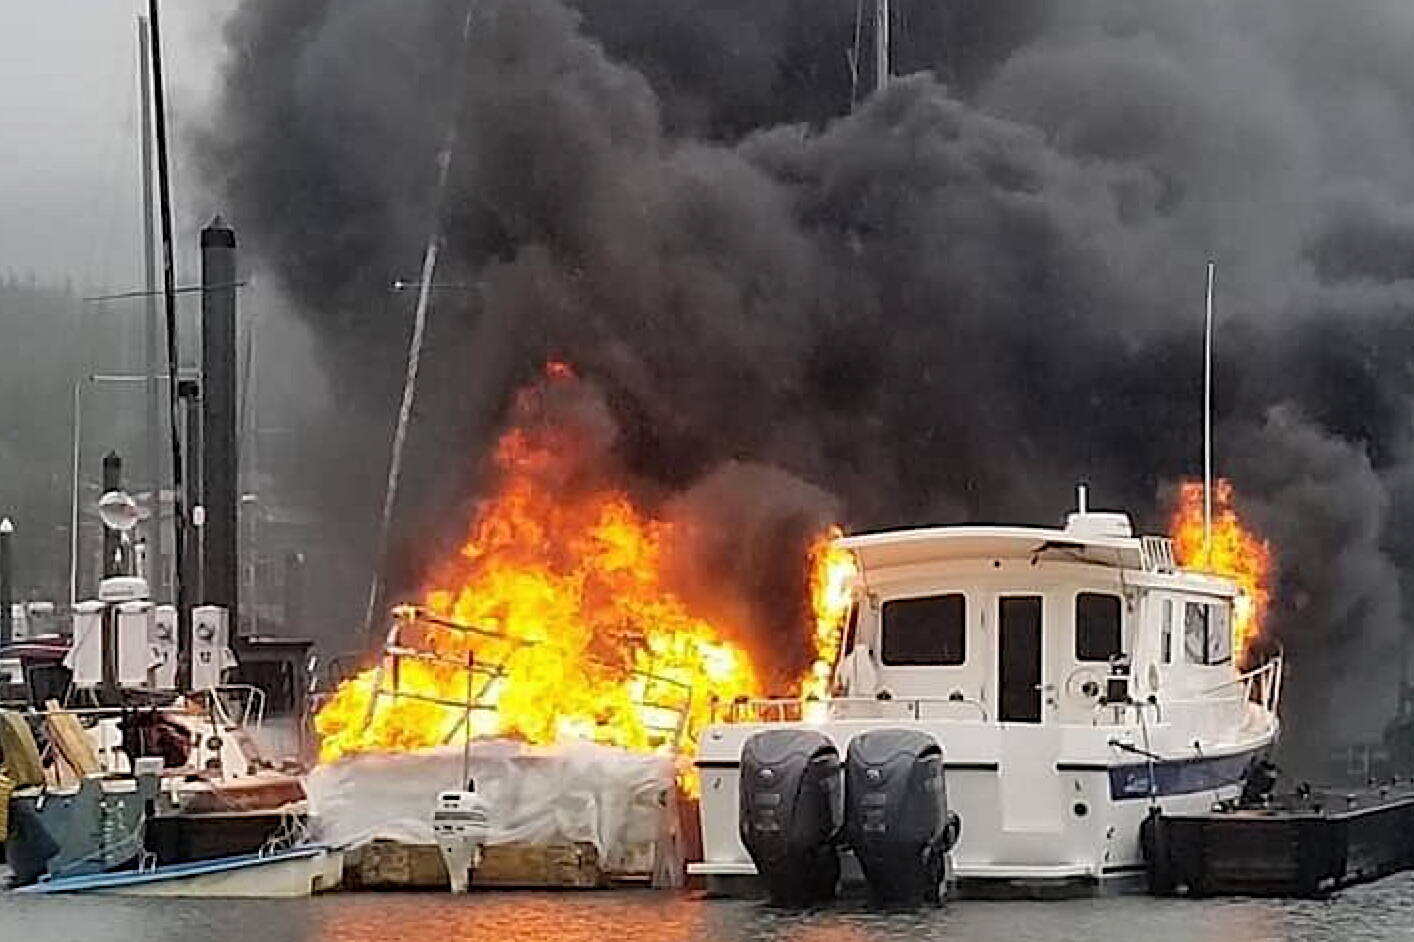 A boat is fully engulfed by fire in Douglas Harbor on Monday evening, with the fire spreading to two other boats. (Capital City Fire/Rescue photo)